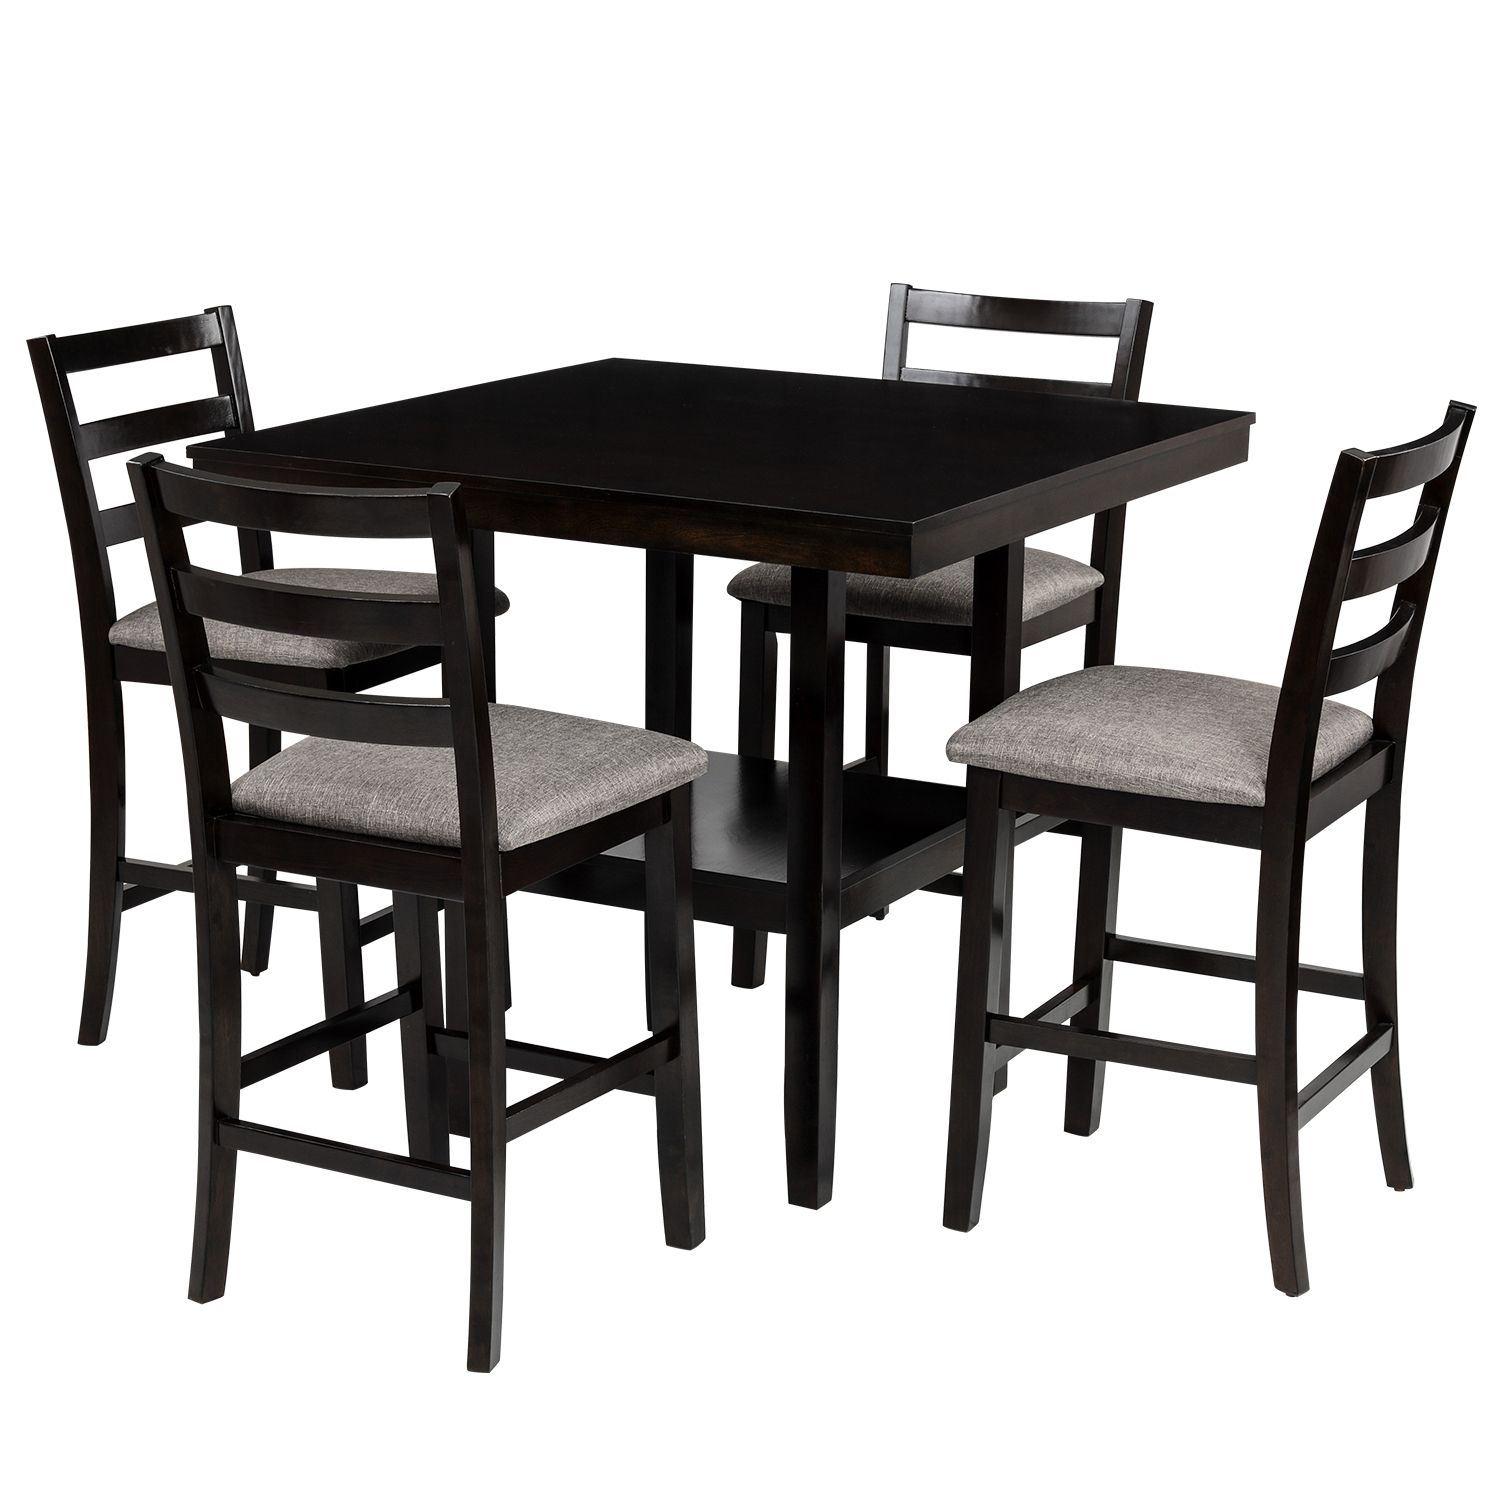 Widely Used 5 Piece Counter Height Wooden Dining Set With Bar Table And 4 Chairs Pertaining To 5 Piece Cafe Dining Sets (View 11 of 15)